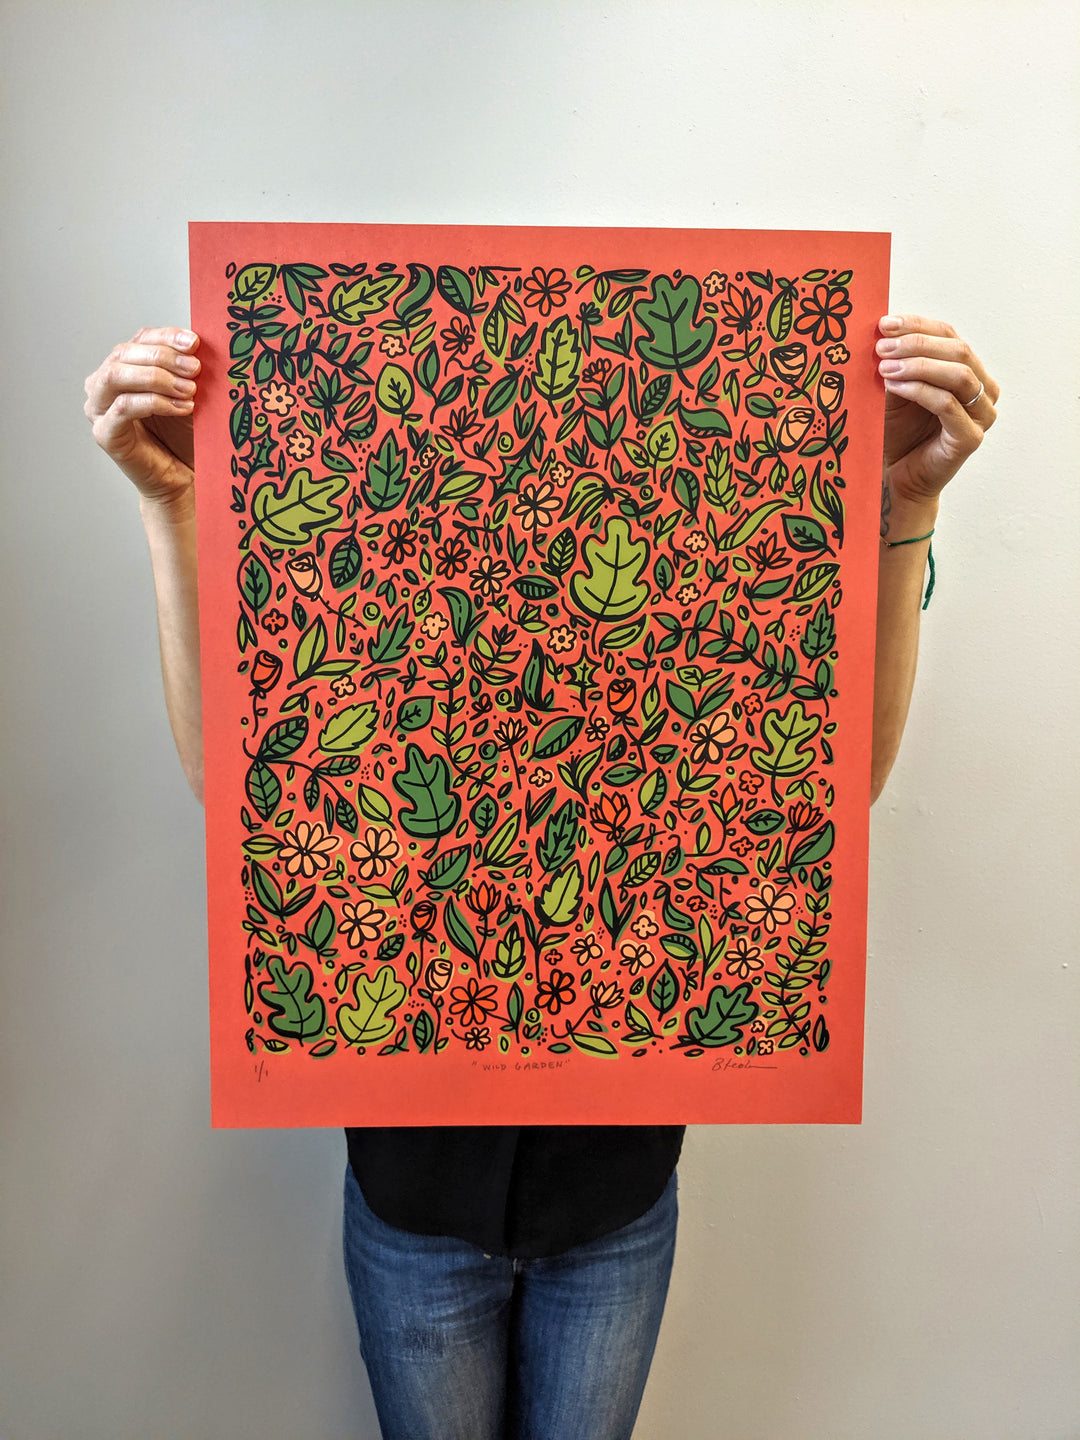 Wild Garden Print on Red by Brainstorm - Limited Edition of 1